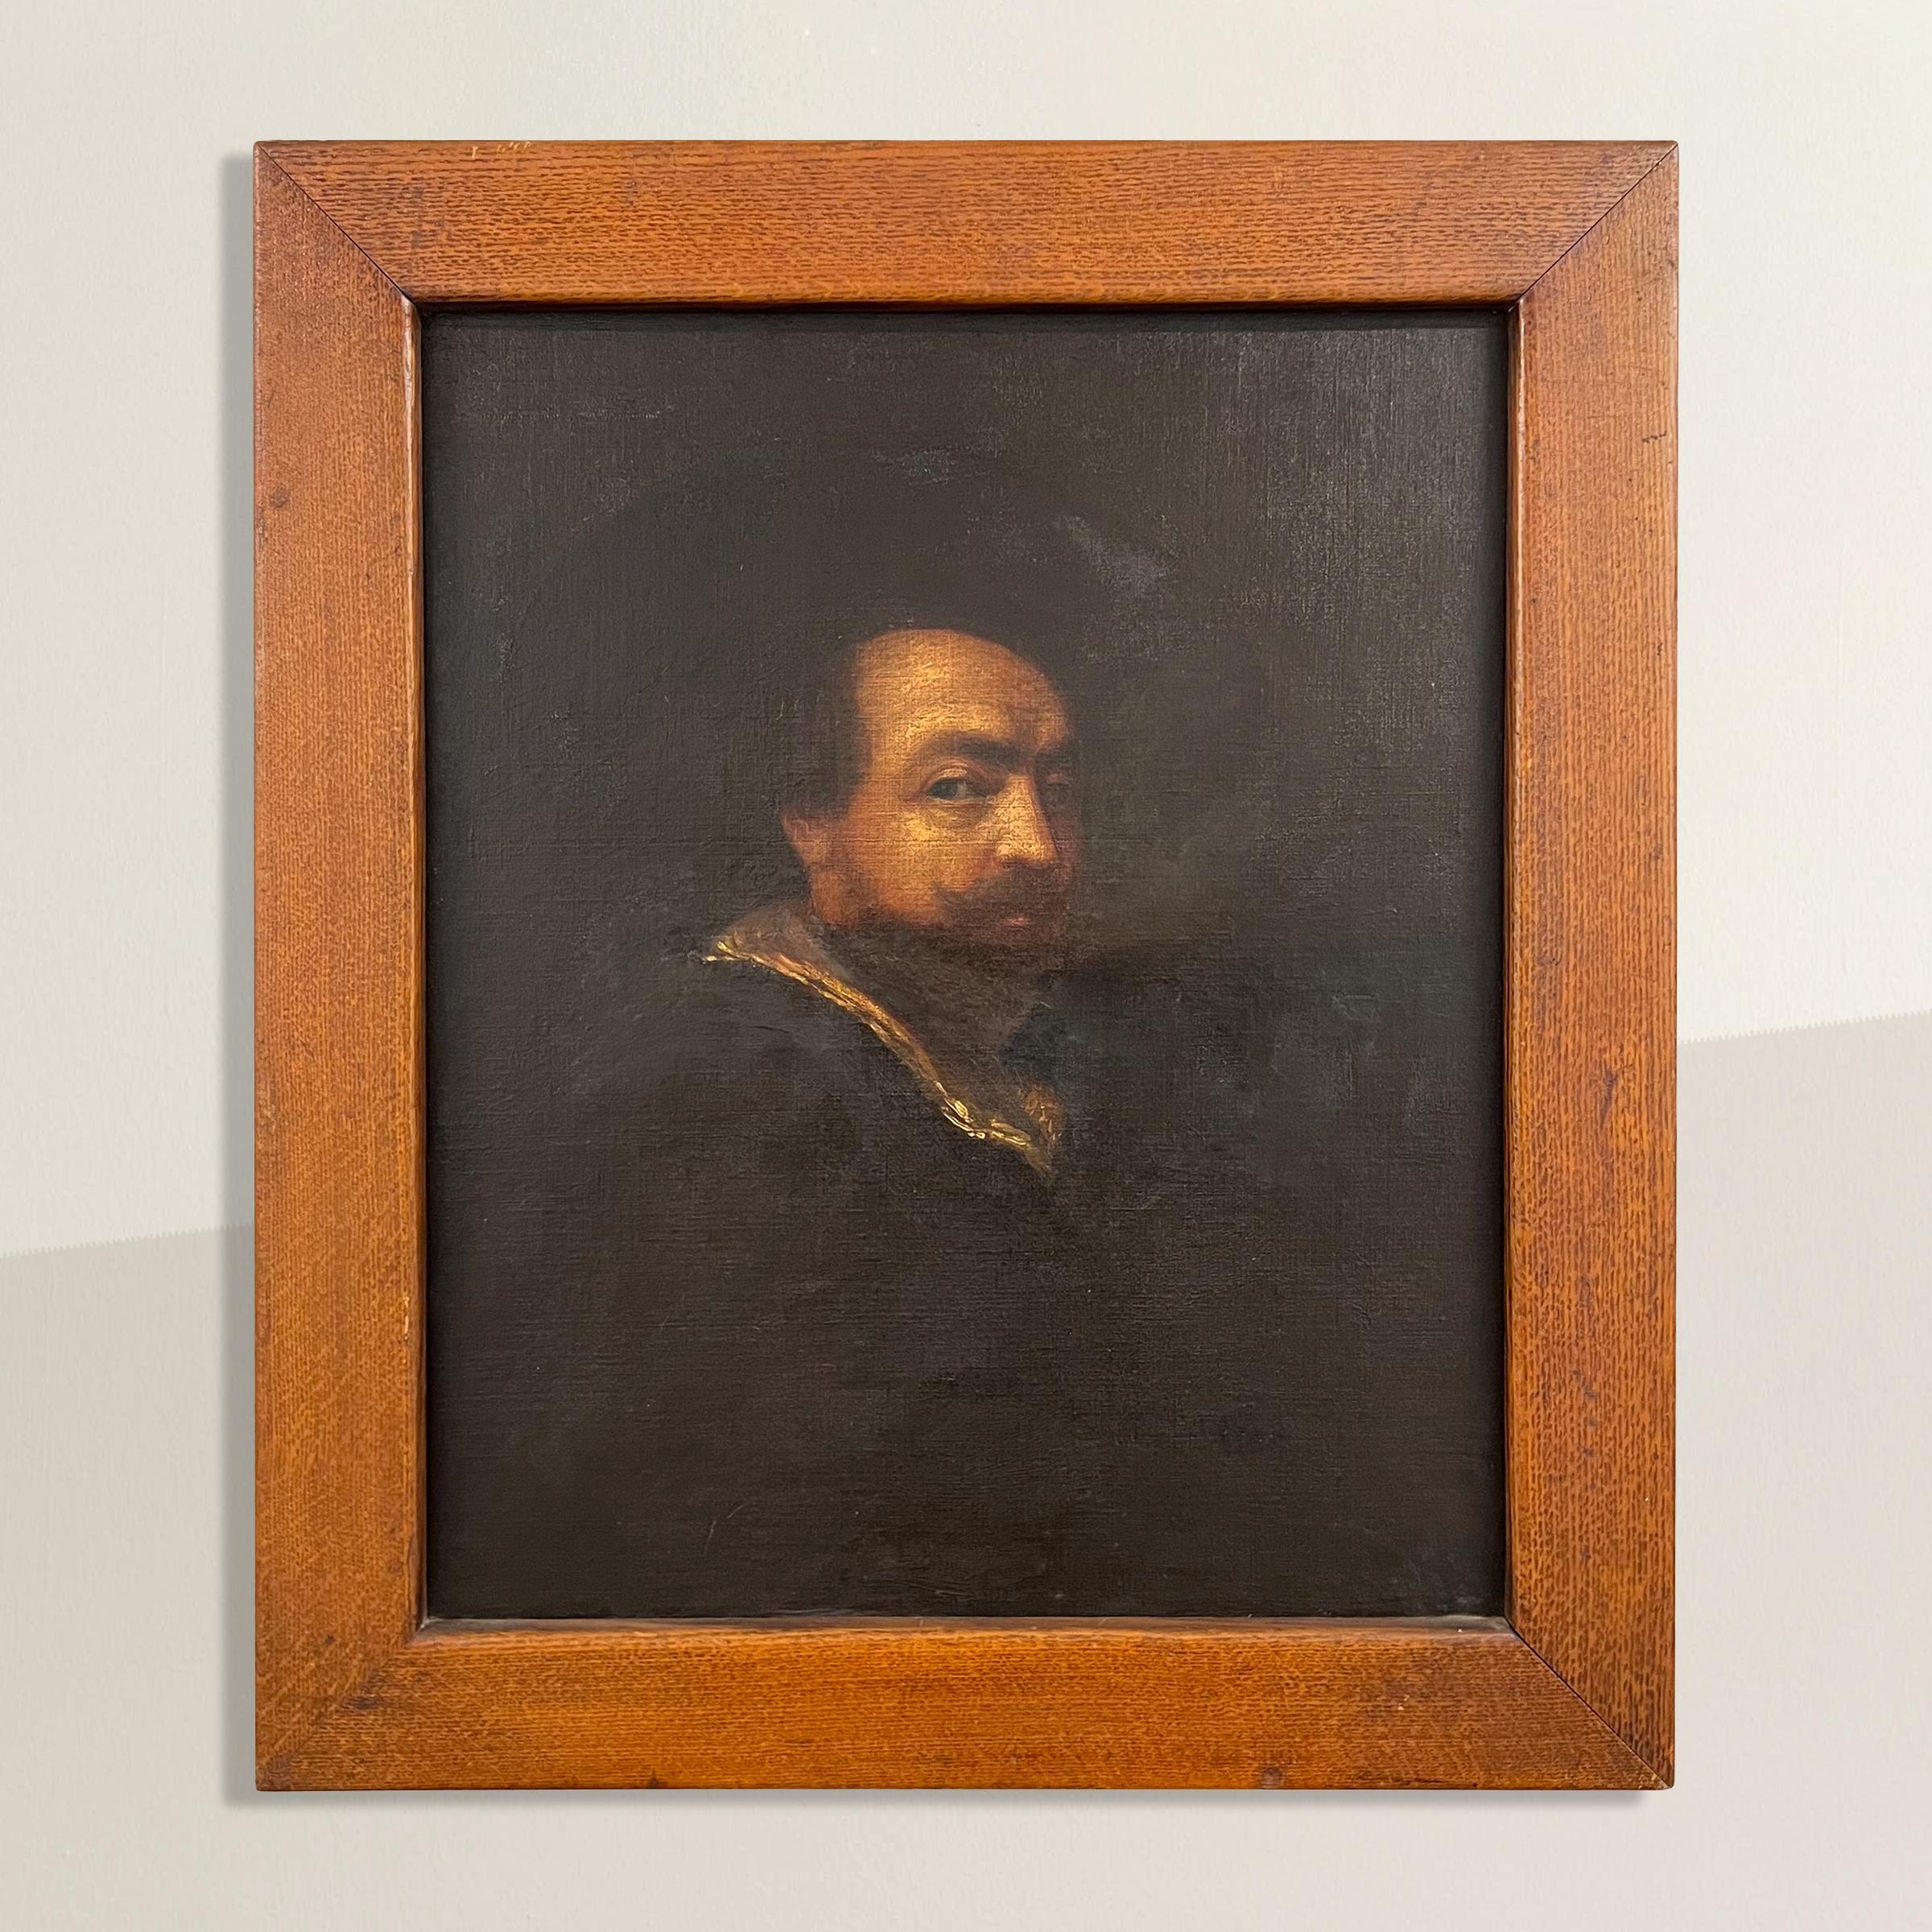 In this compelling 19th-century art student study, we encounter a mesmerizing self-portrait by the eminent Baroque master, Peter Paul Rubens. The painting captures Rubens adorned in a wide-brimmed hat, a symbol of his commanding presence and